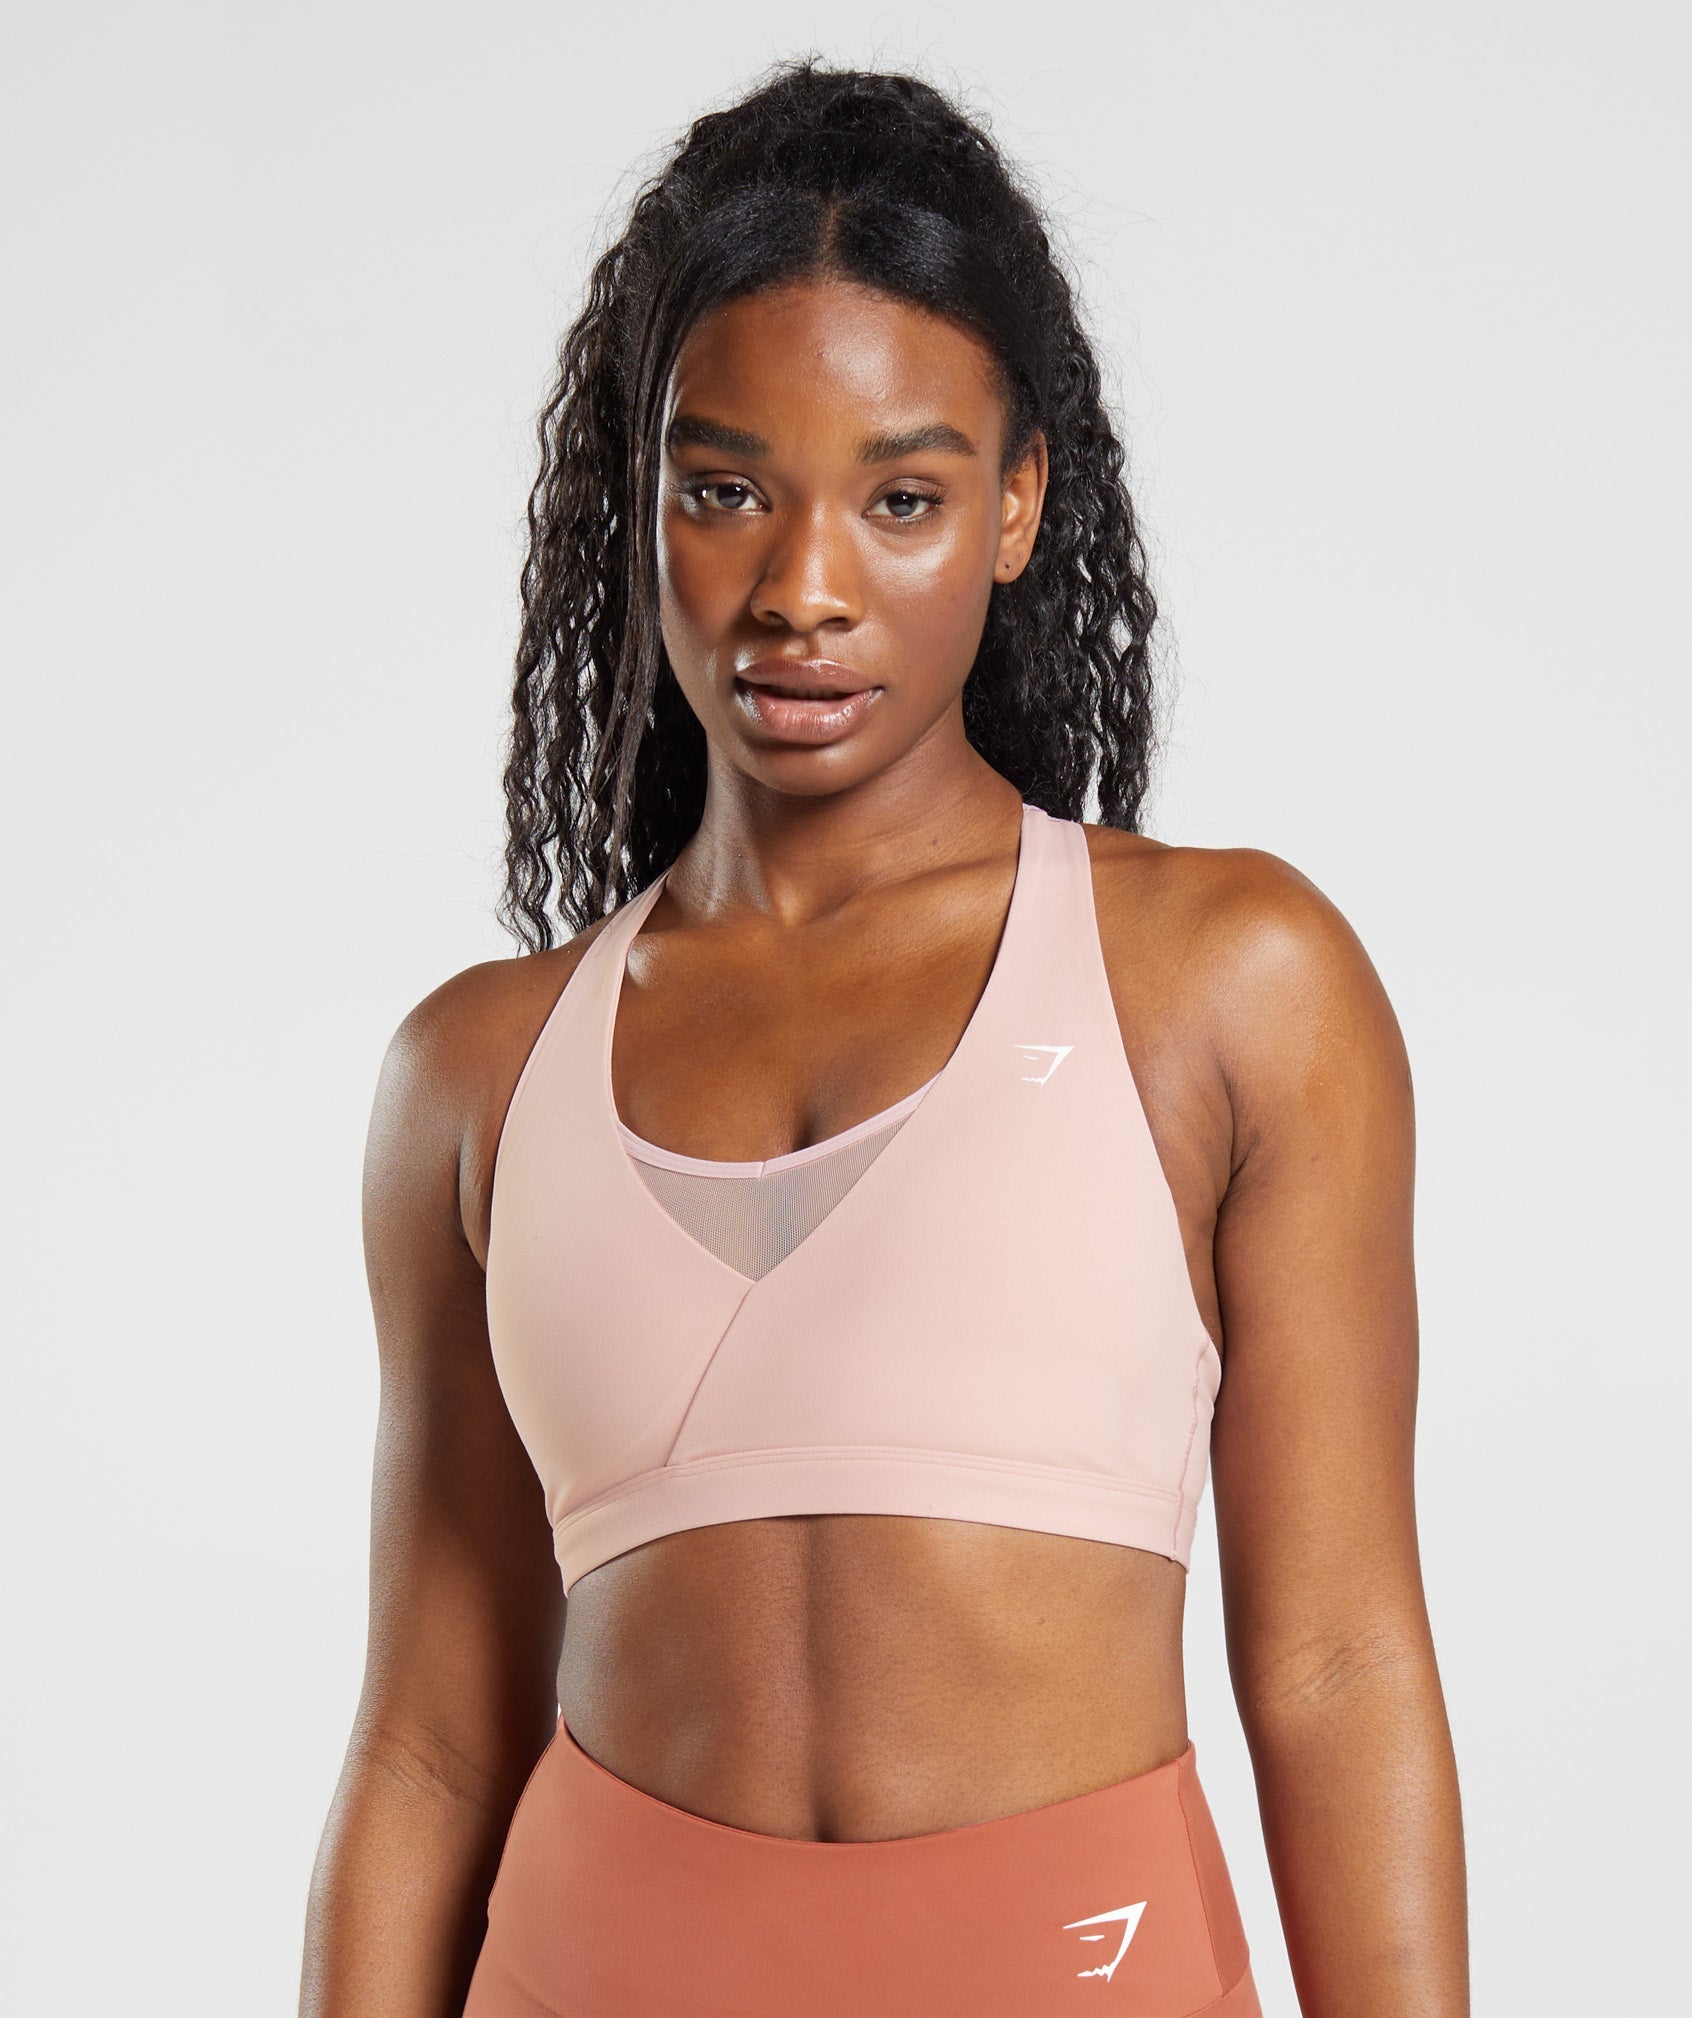 Gymshark Ruched Strappy Sports Bra - Classic Pink  Sports bra, Strappy  sports bras, Women's sports bras